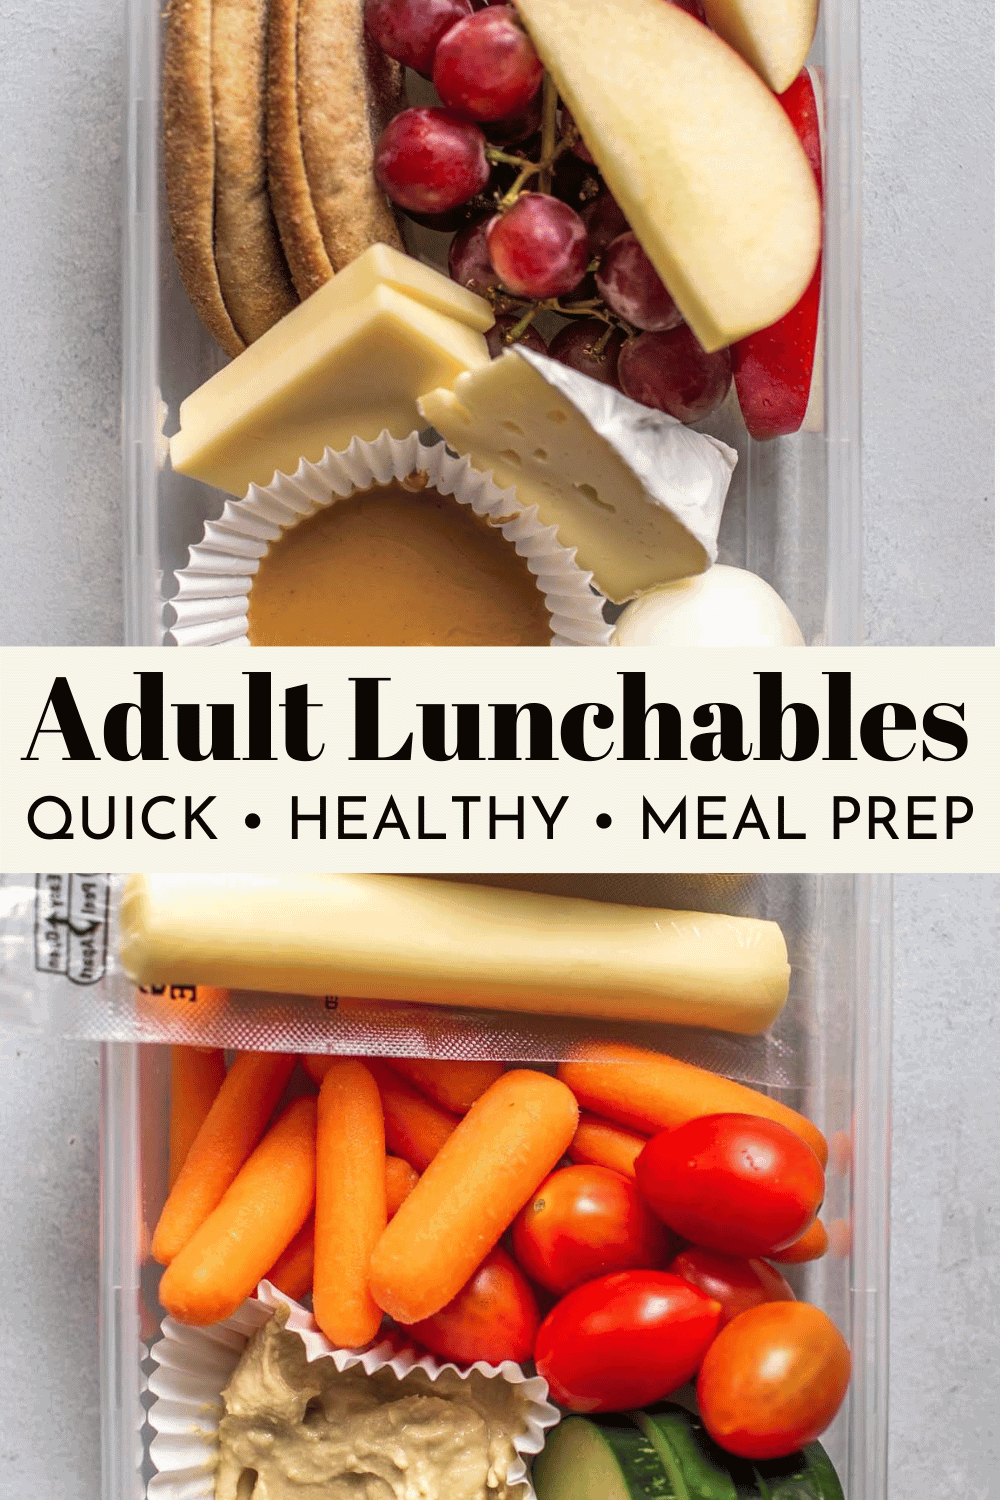 DIY Adult Lunchables That Will Make Your Day - Fad Free Nutrition Blog